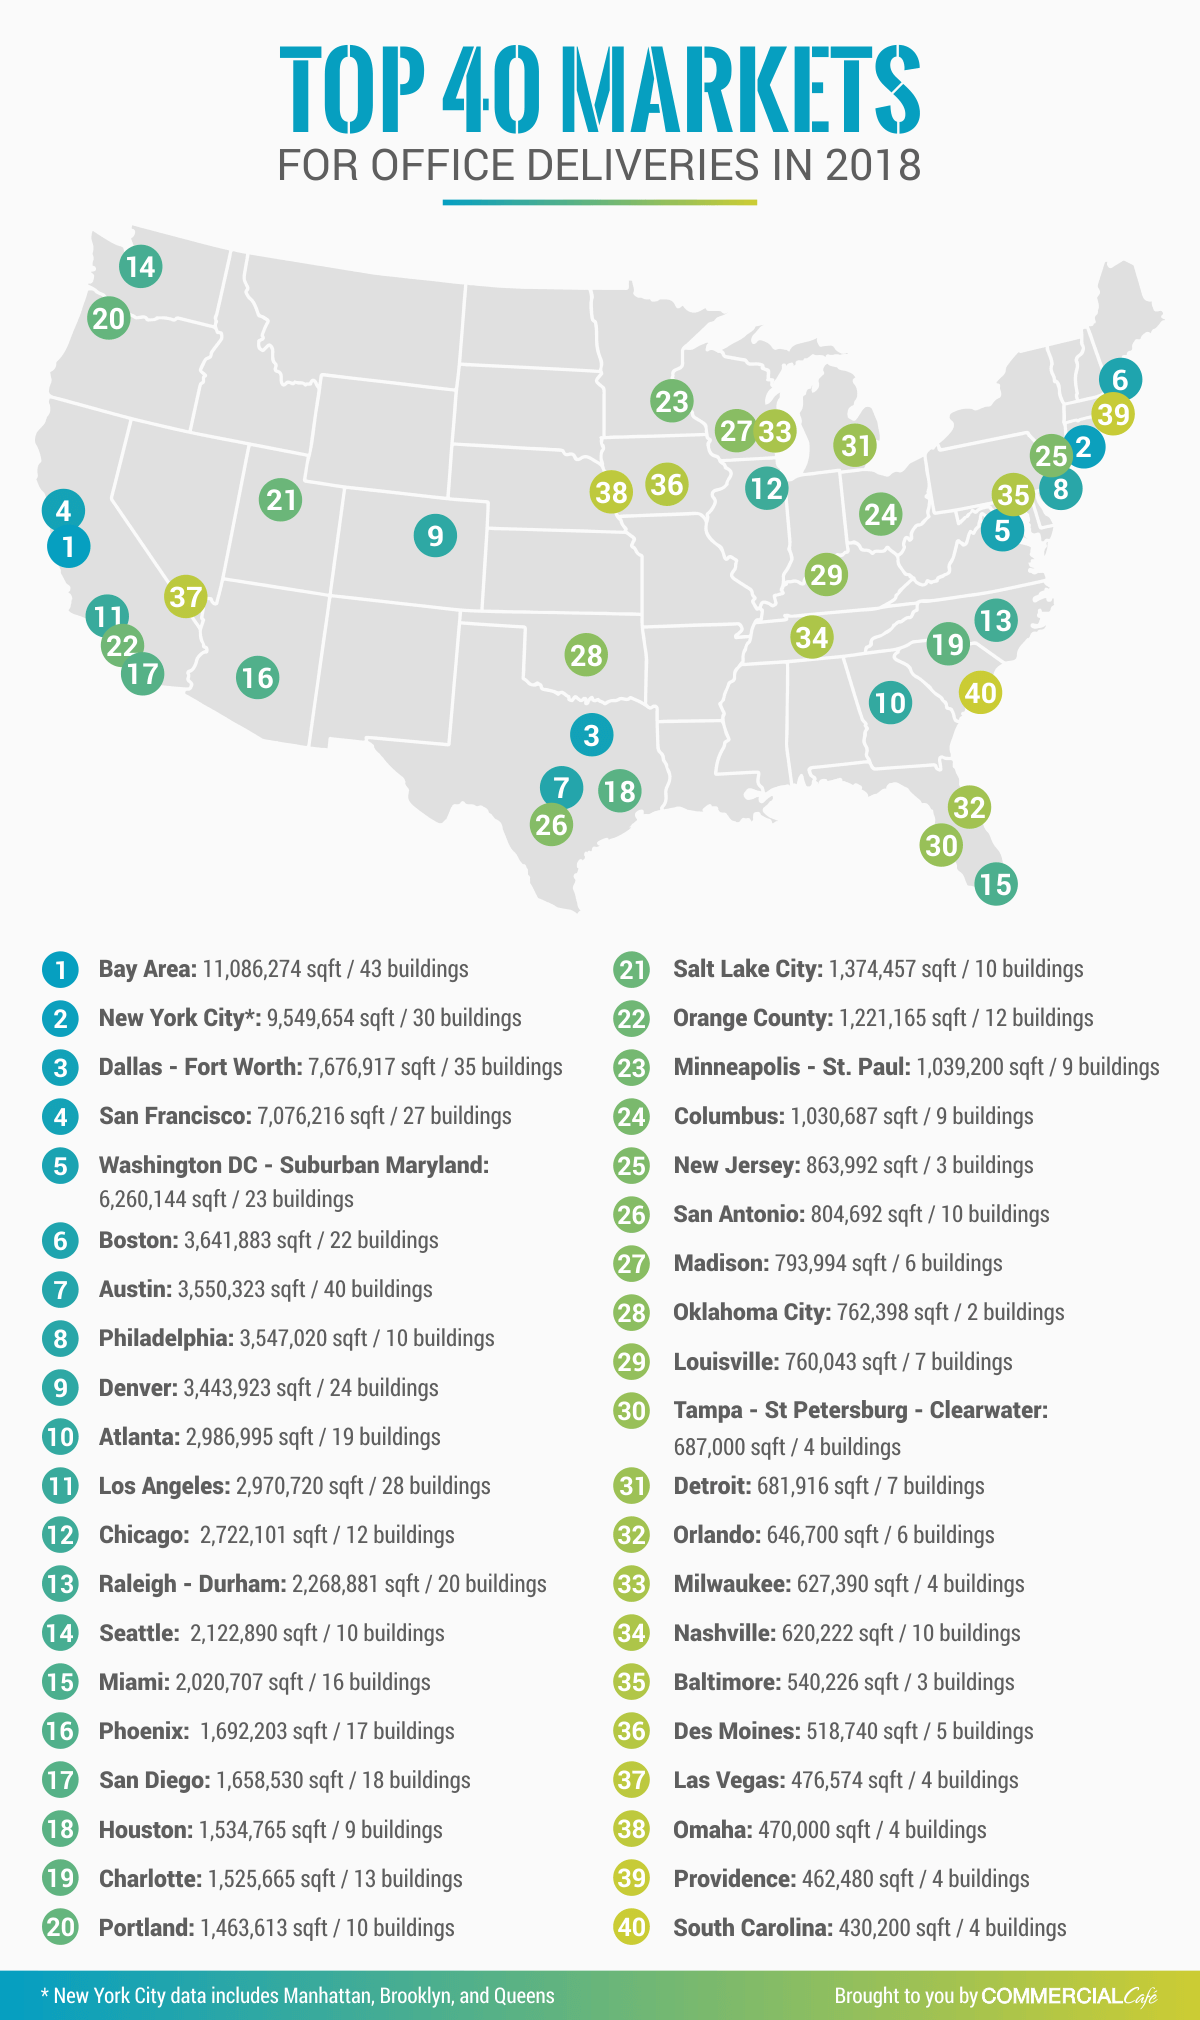 Top 40 Markets for Office Deliveries in 2018